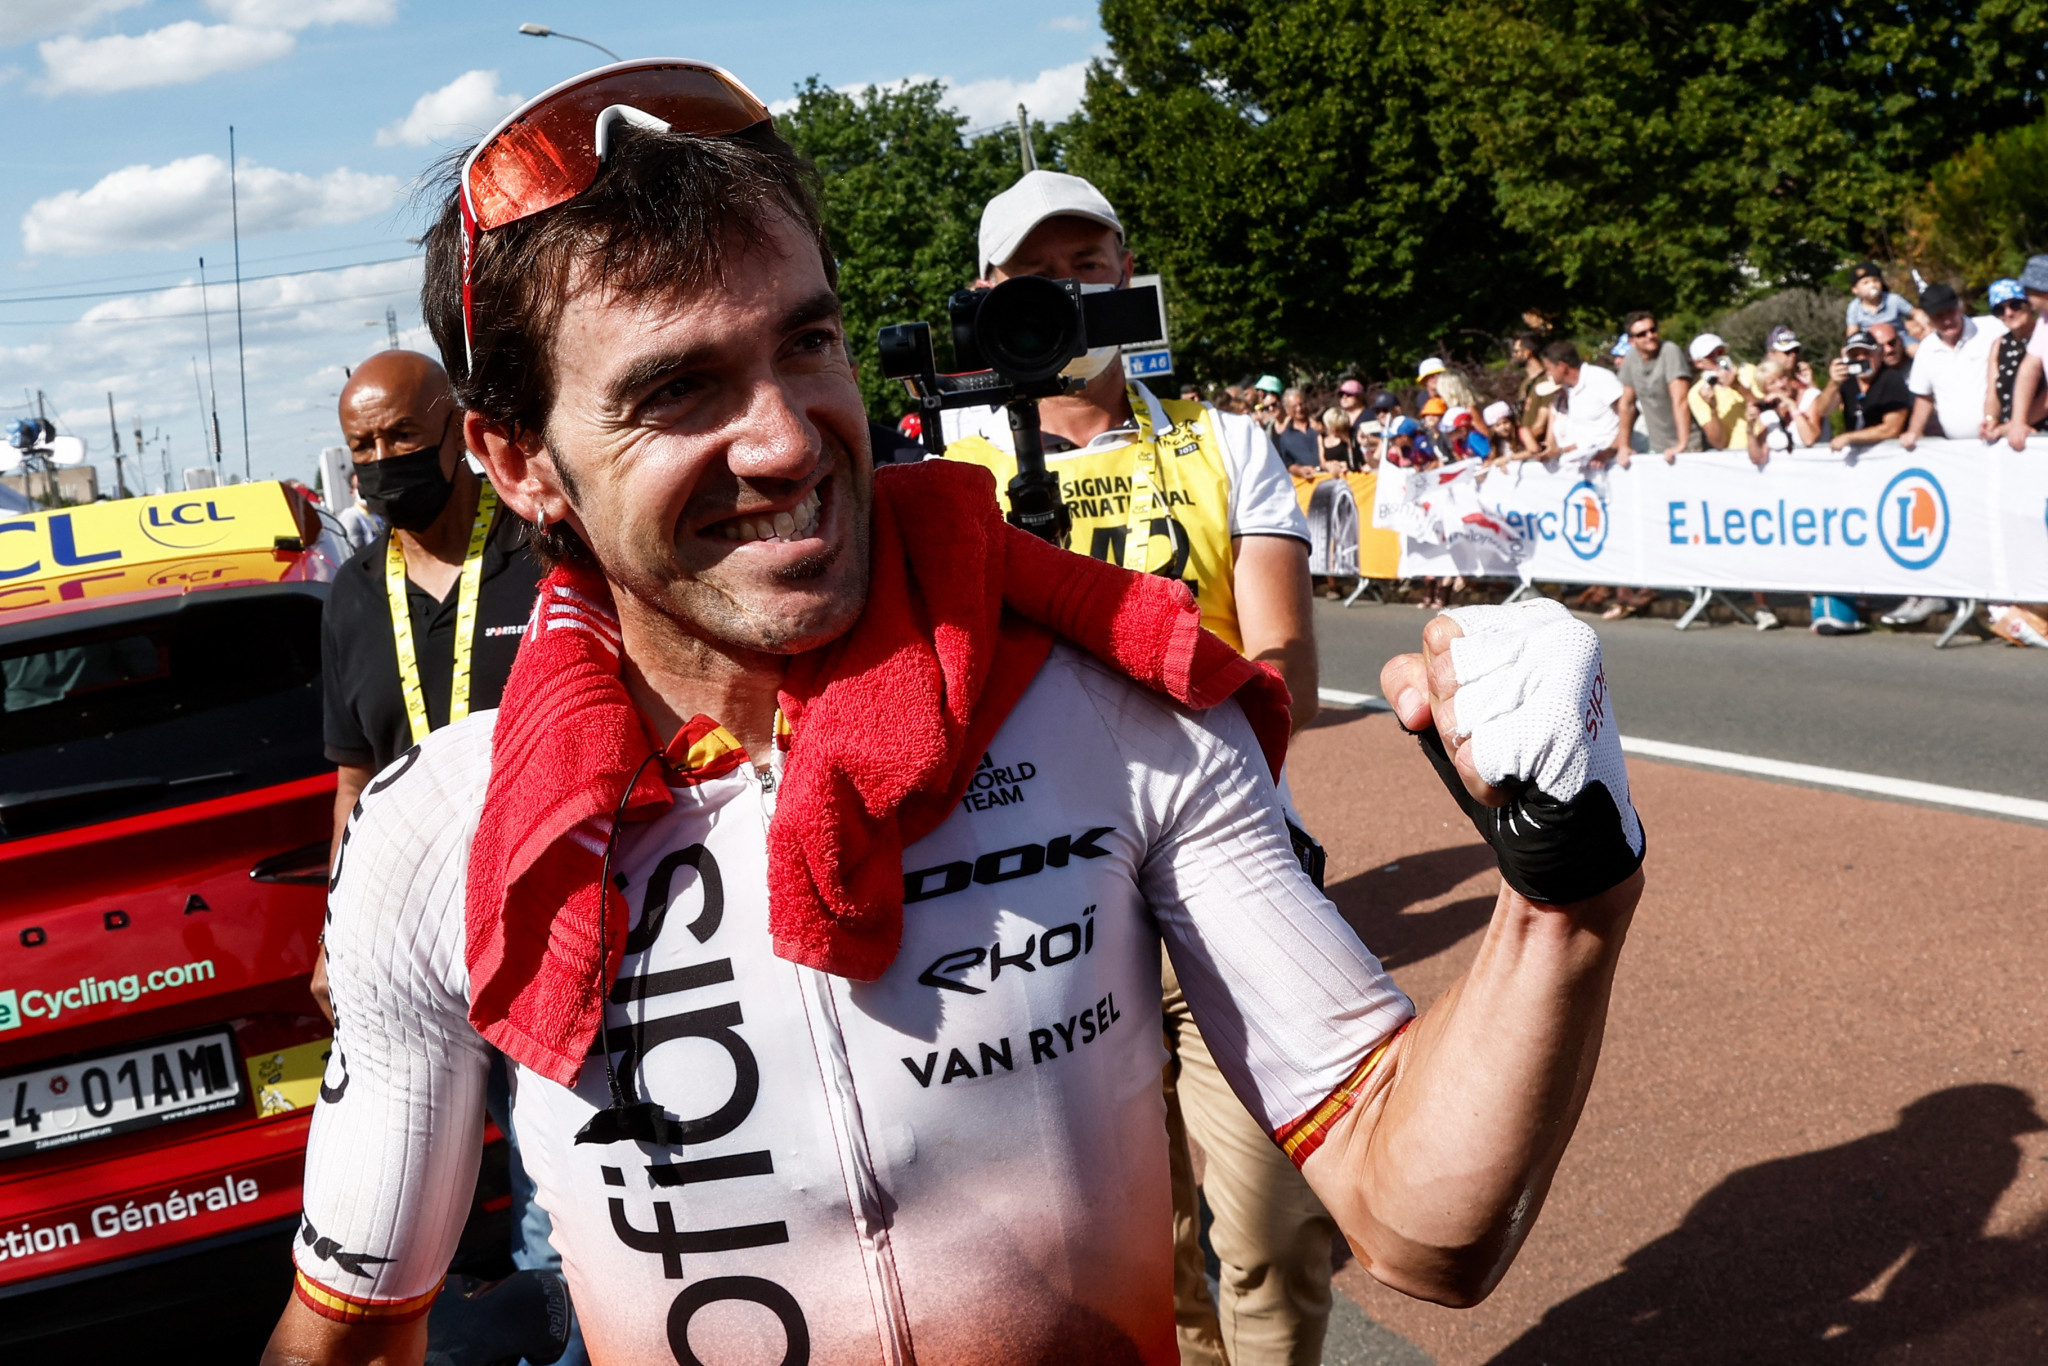 Izagirre delivers another stage win for Spain and Cofidis at Tour de France